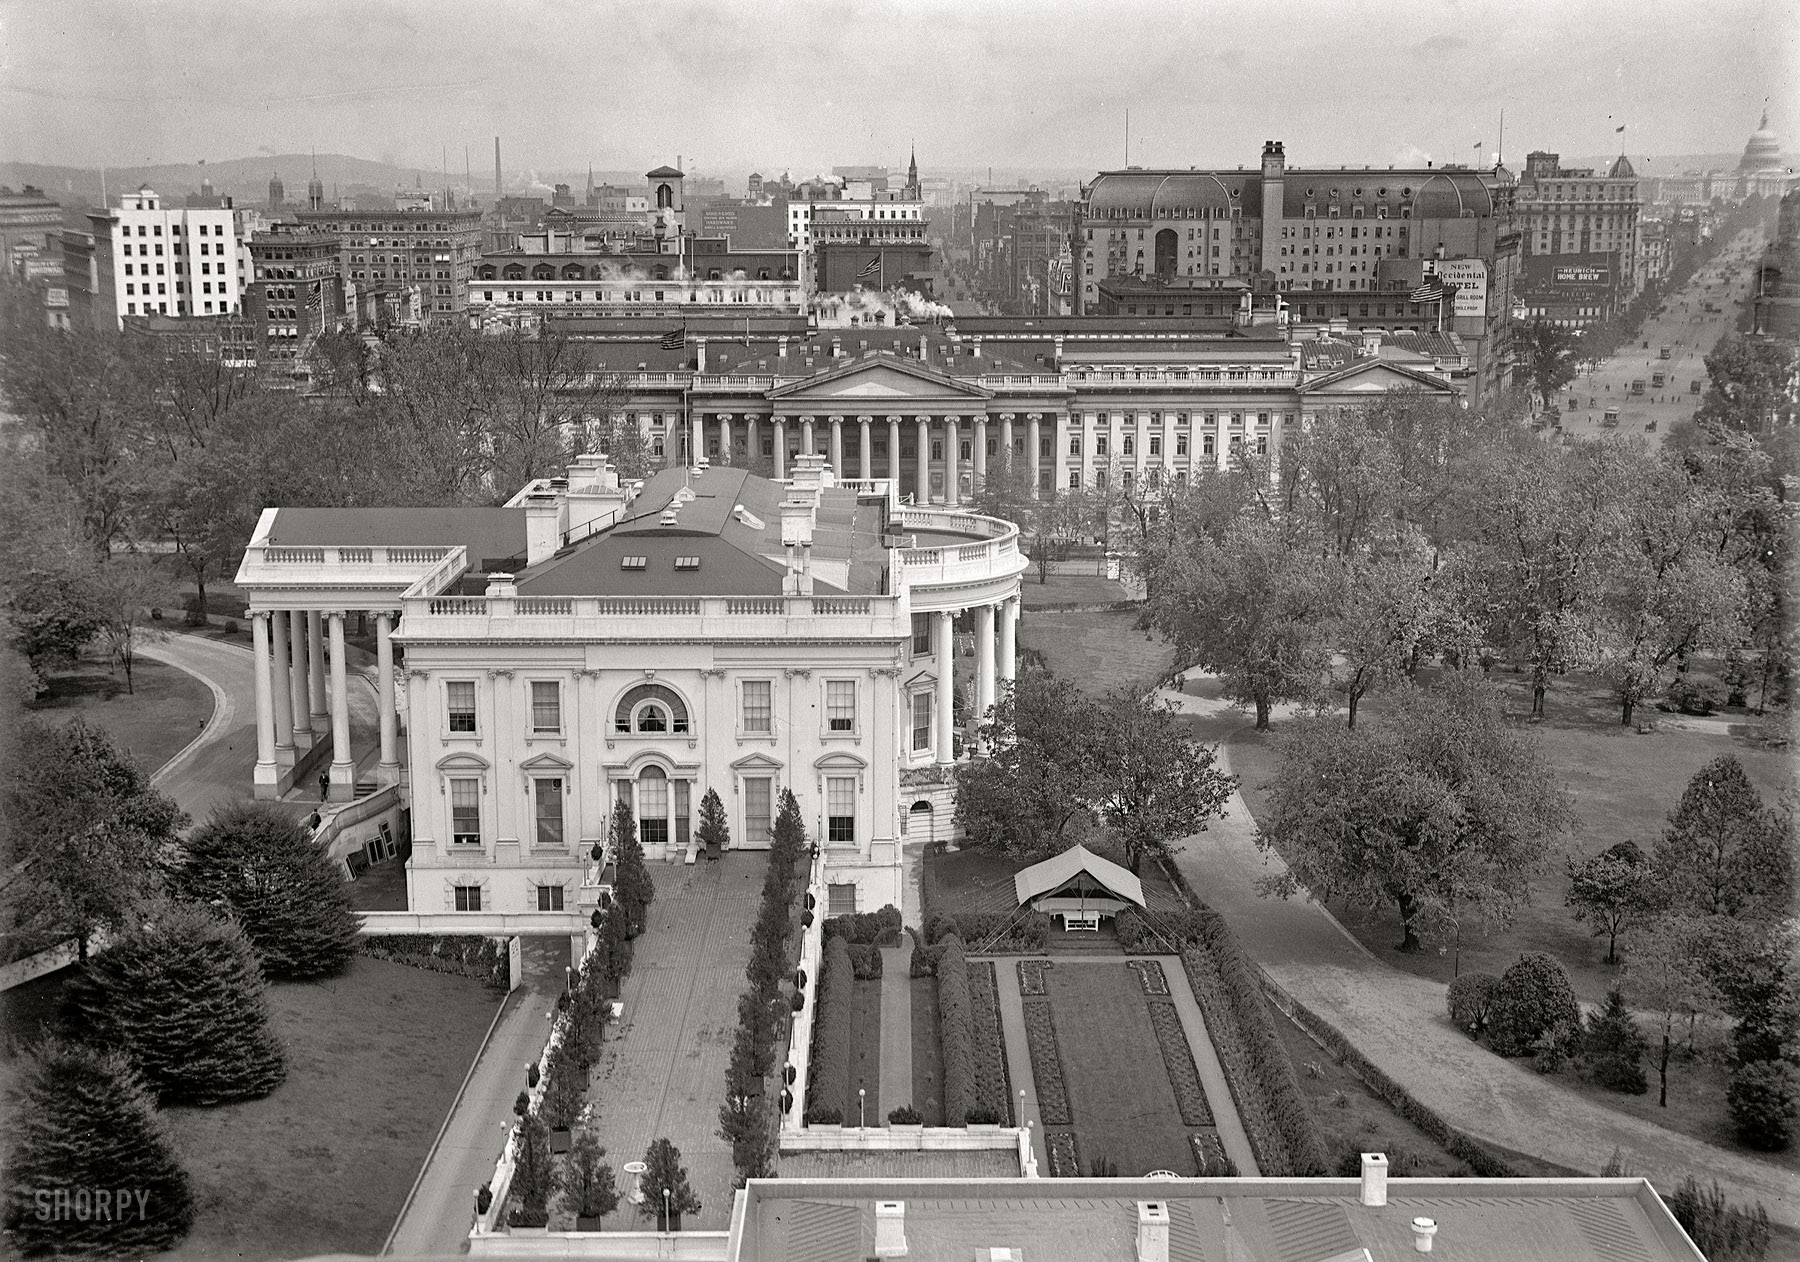 1914. "White House tent in Rose Garden." A view of the executive mansion from over the West Wing looking east past the Treasury and along Pennsylvania Avenue to the Capitol. Harris & Ewing Collection glass negative. View full size.